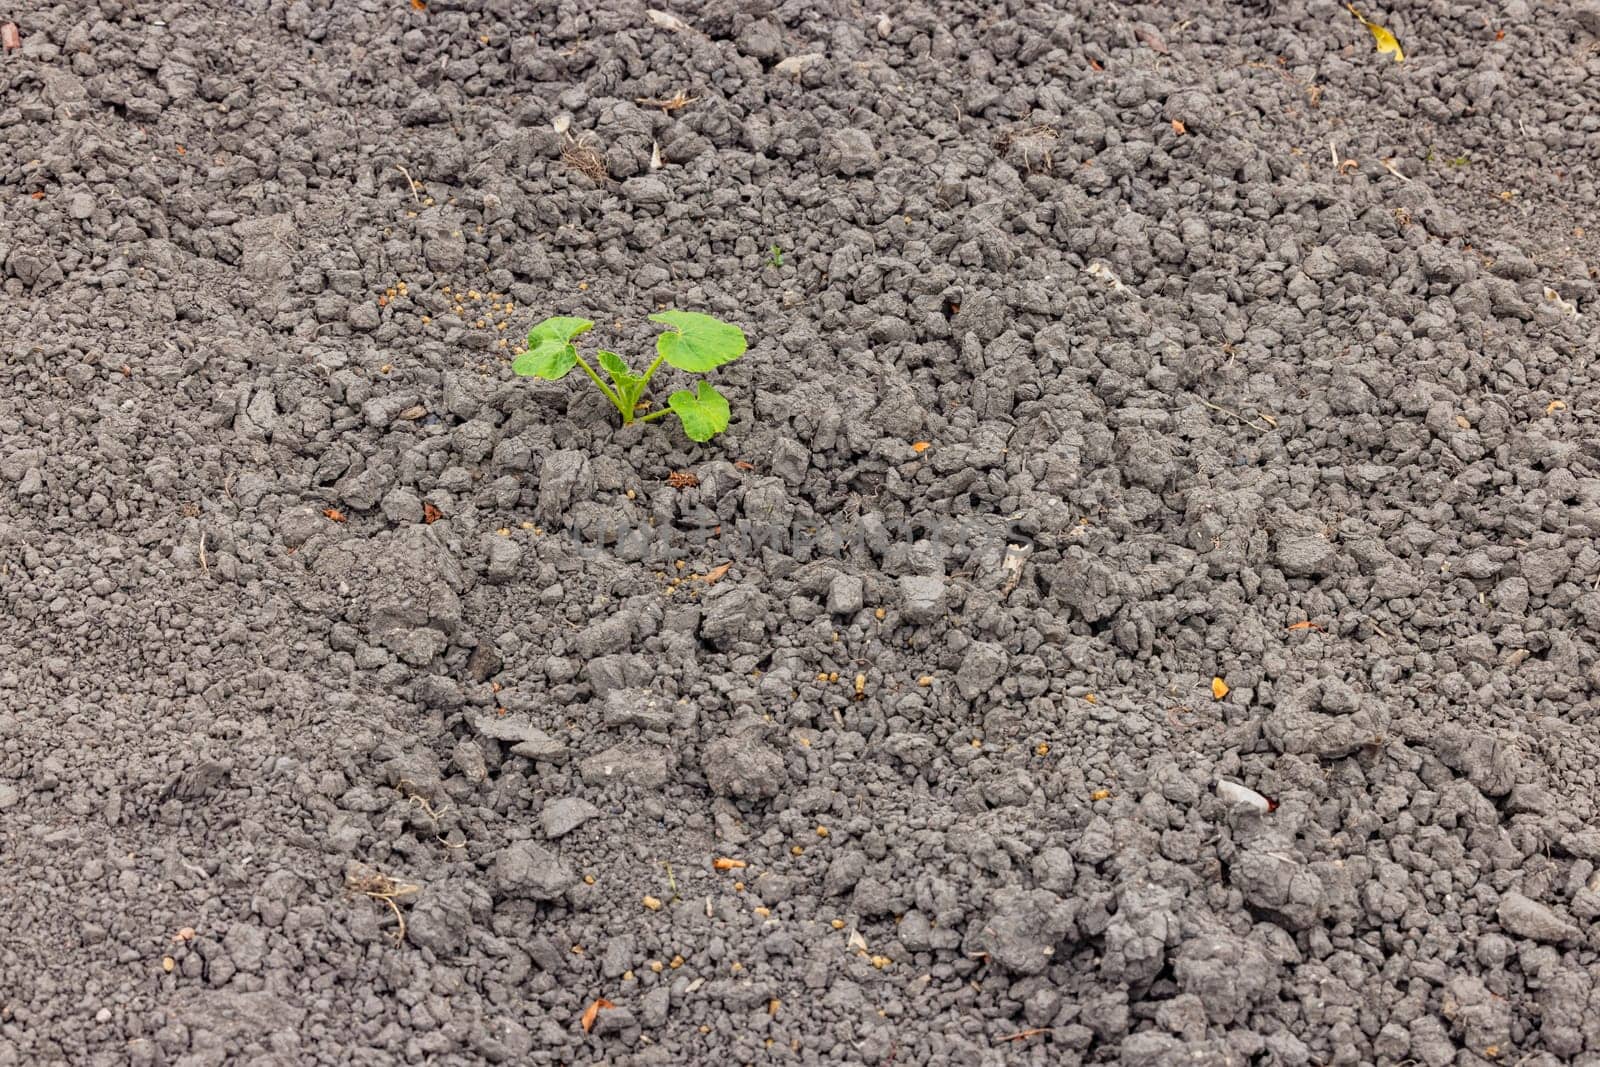 A single green plant in a field marked by drought by astrosoft